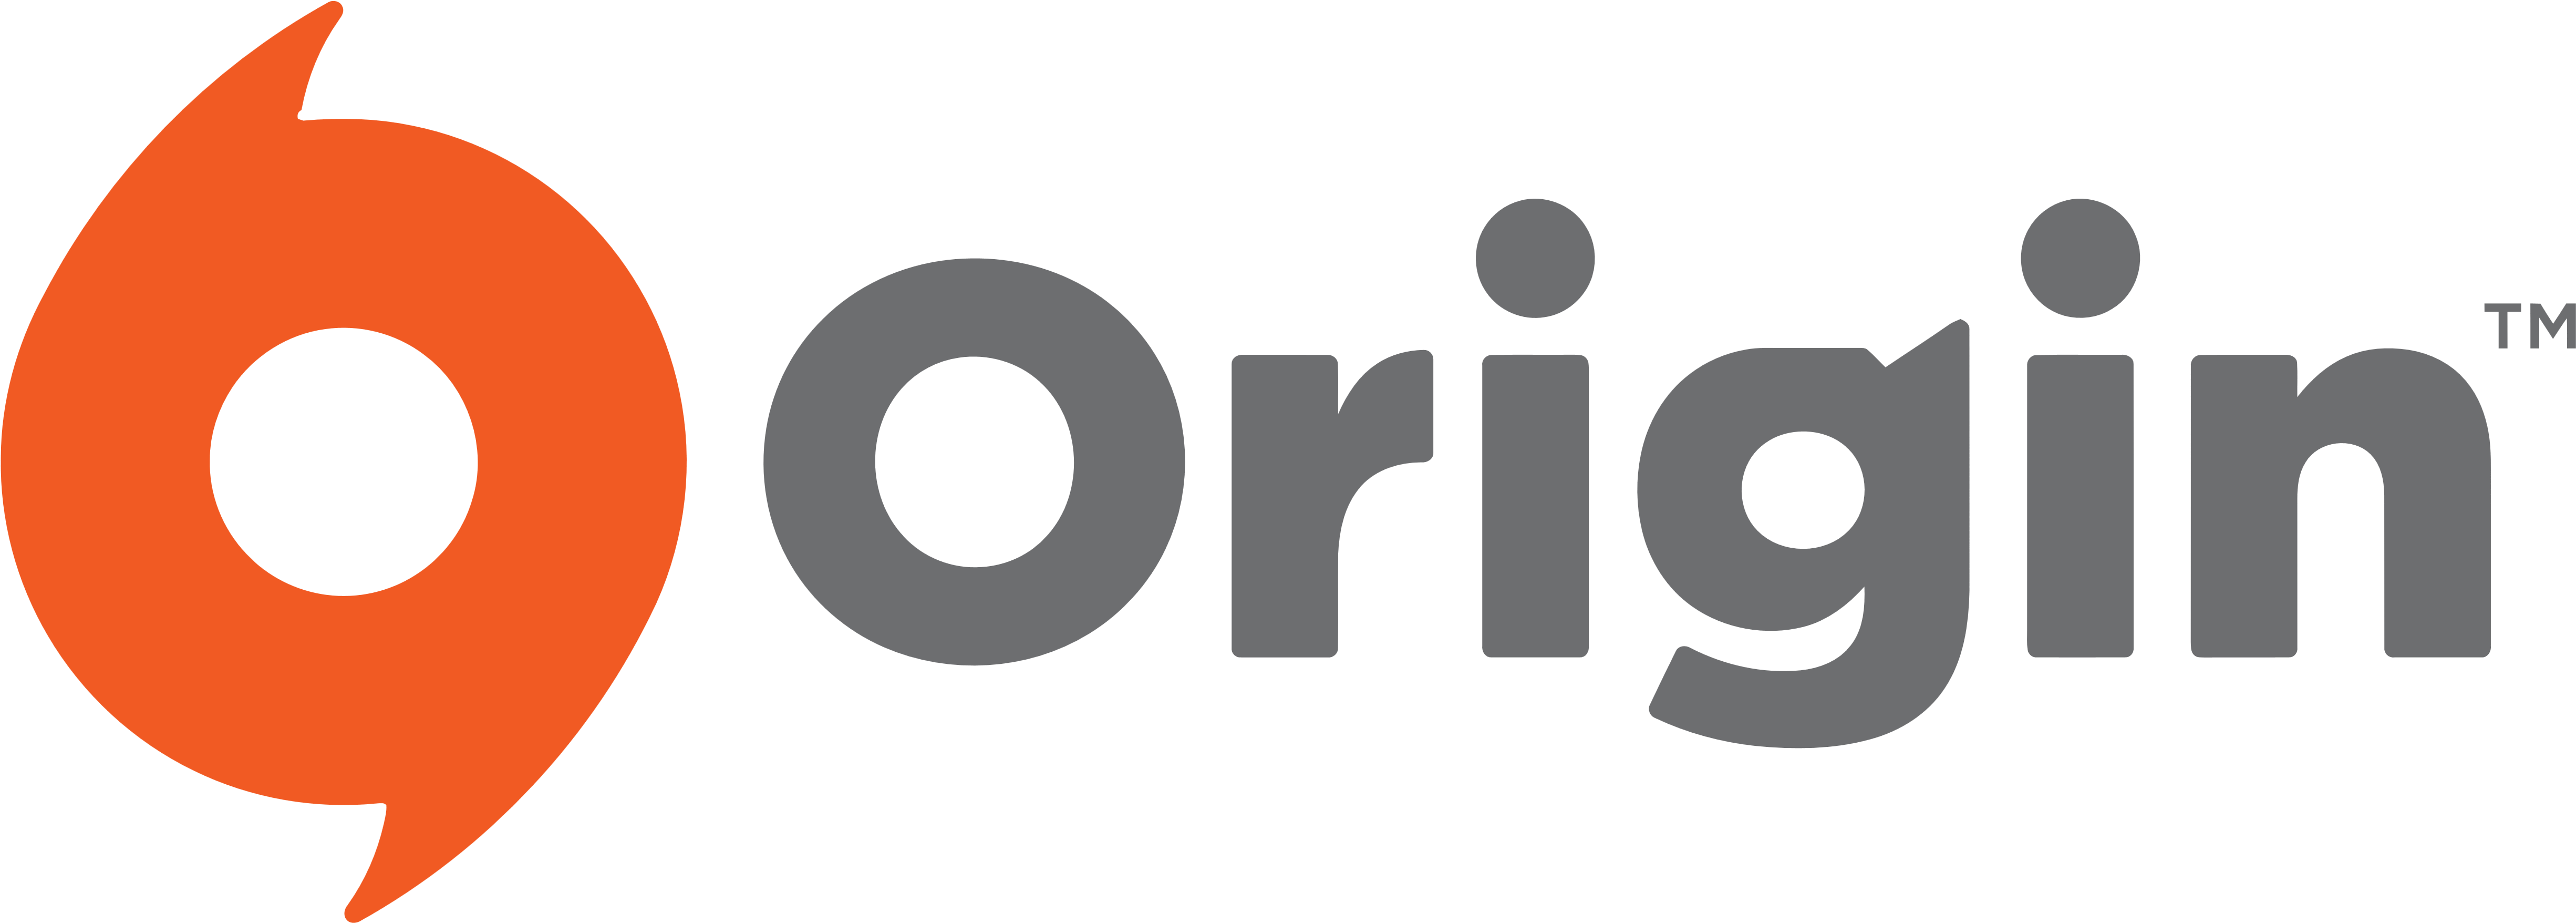 Some Logos Are Clickable And Available In Large Sizes - Ea Origin Logo Png (5000x1904)